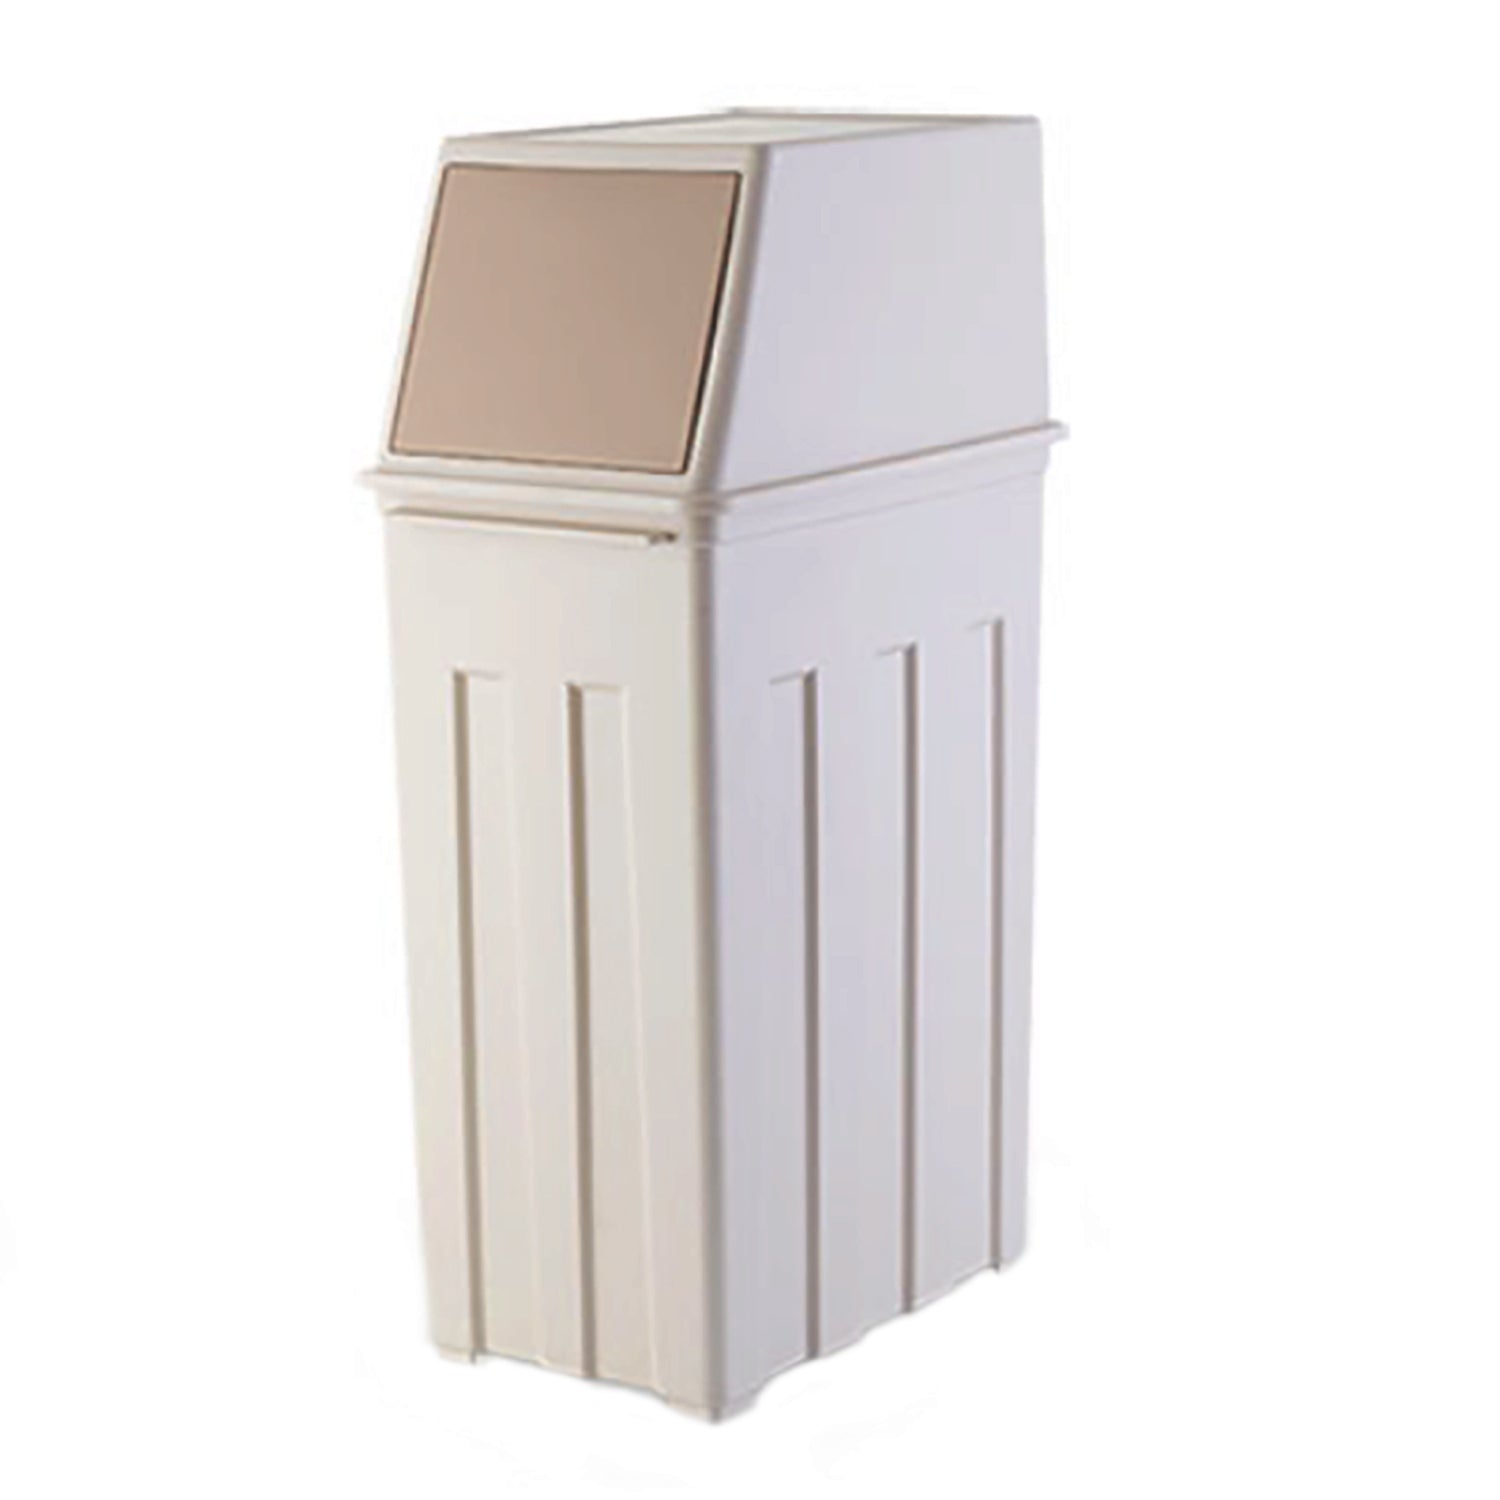 Load image into Gallery viewer, 8 Gallon Trash Can with Hinged Flap Cover | Indoor Outdoor Swing Door Waste Basket